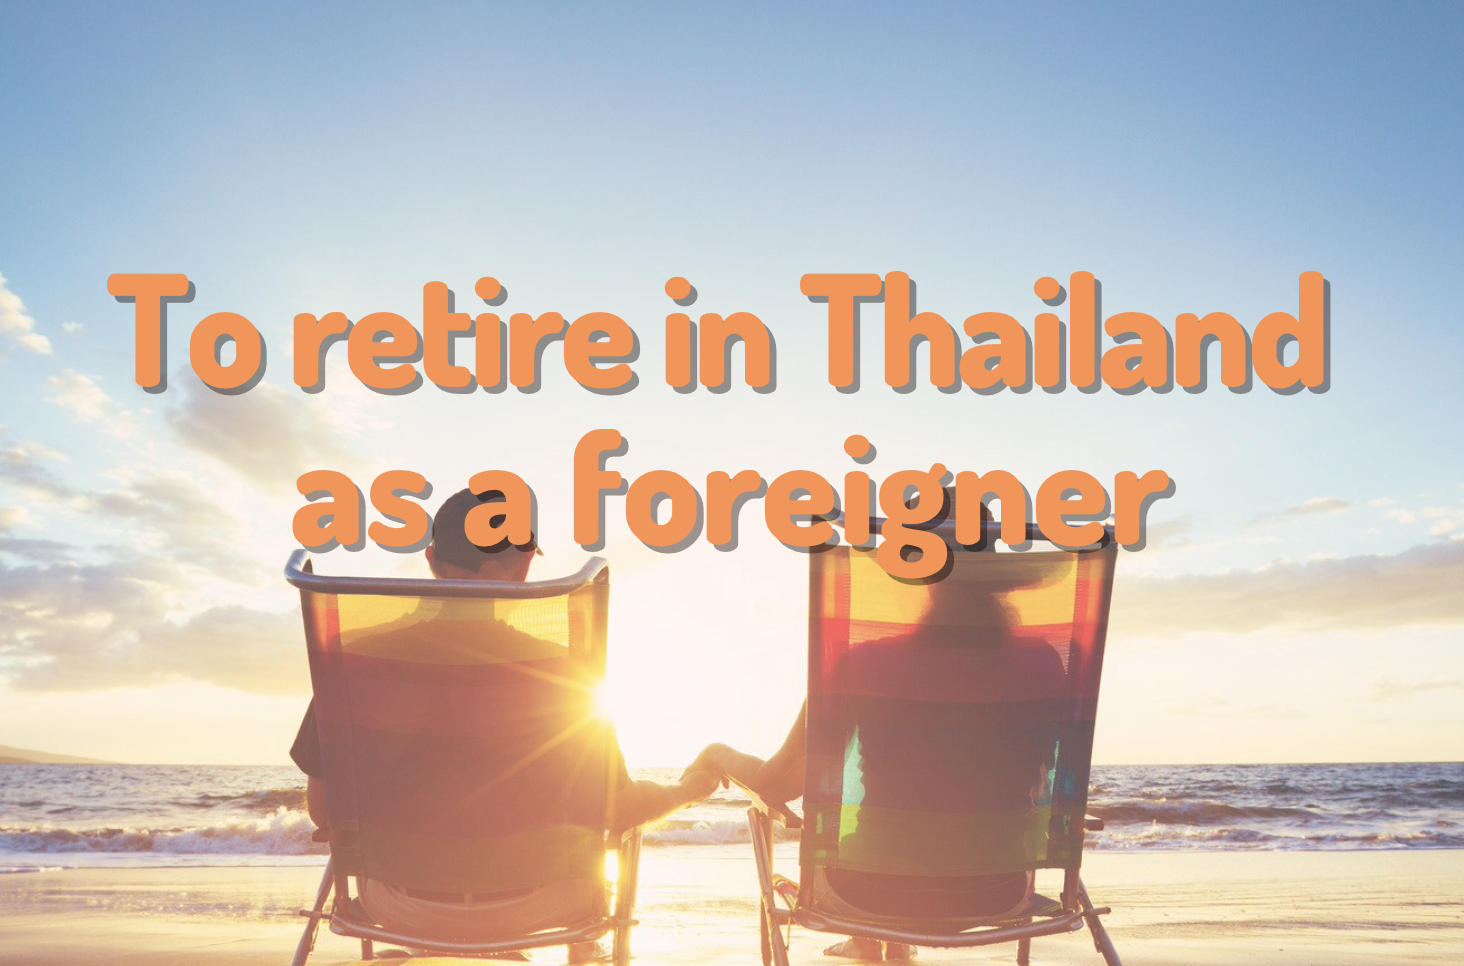 To retire in Thailand as a foreigner